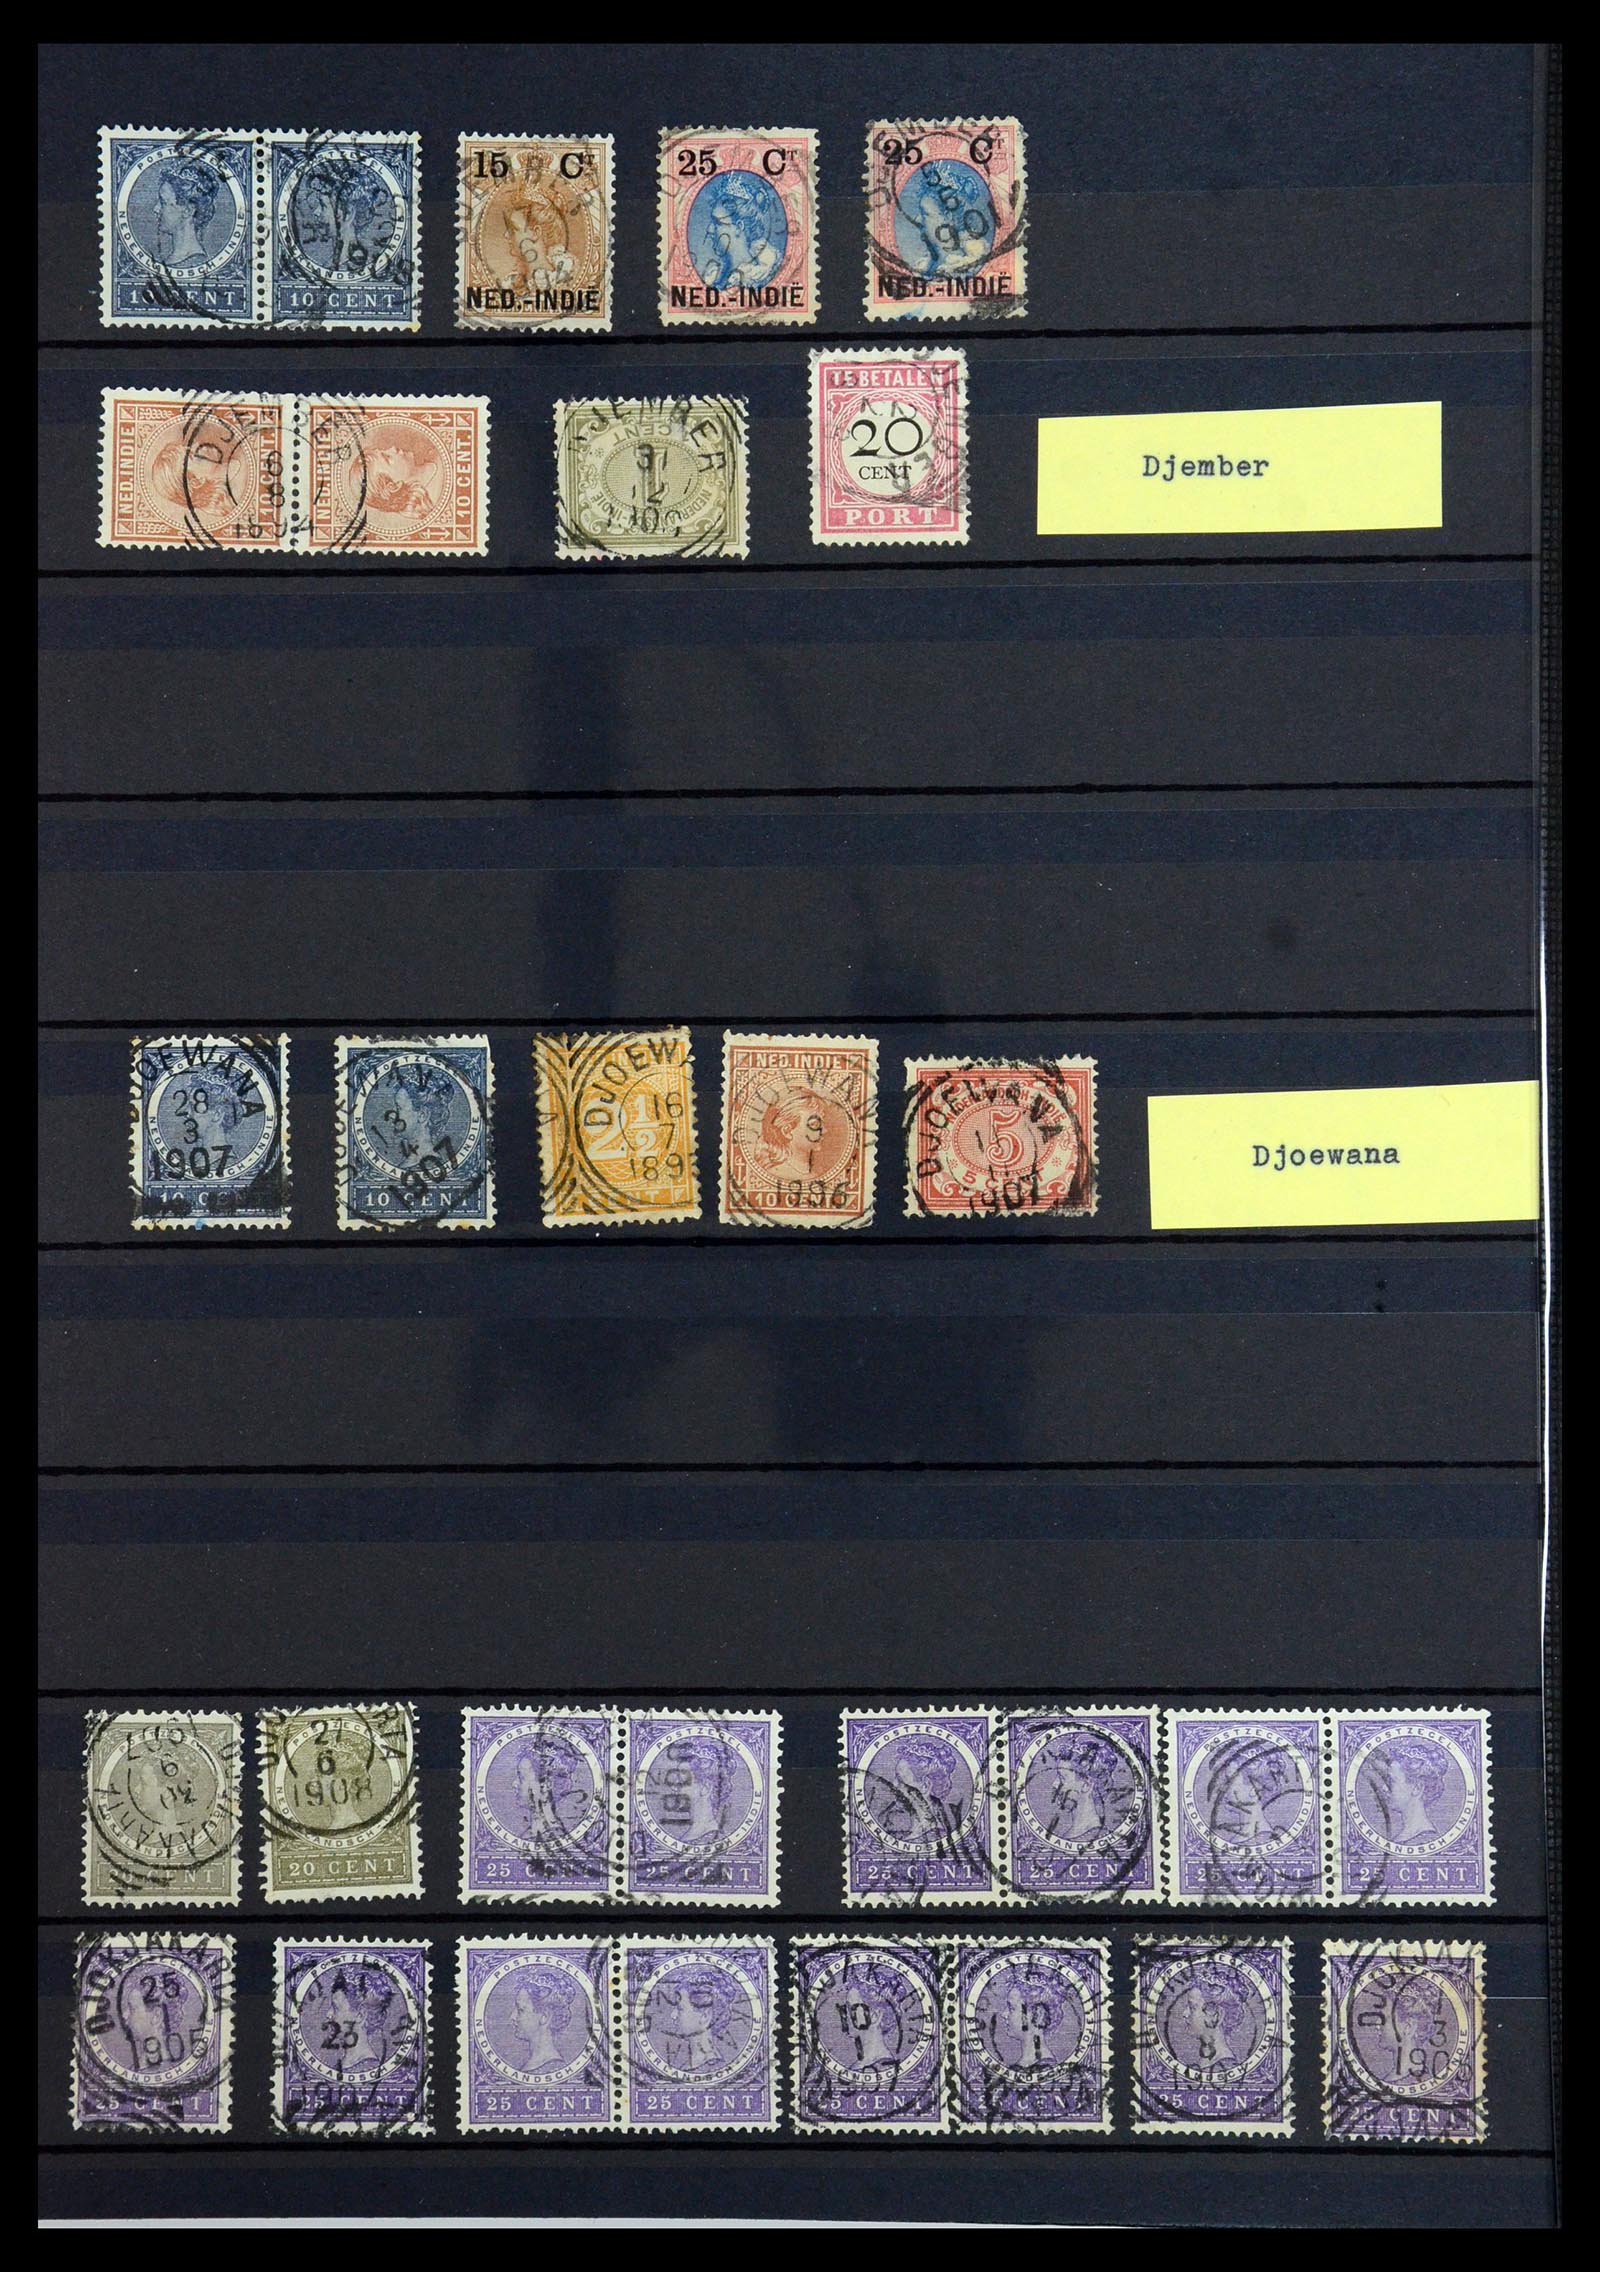 36371 014 - Stamp collection 36371 Dutch east Indies cancels.